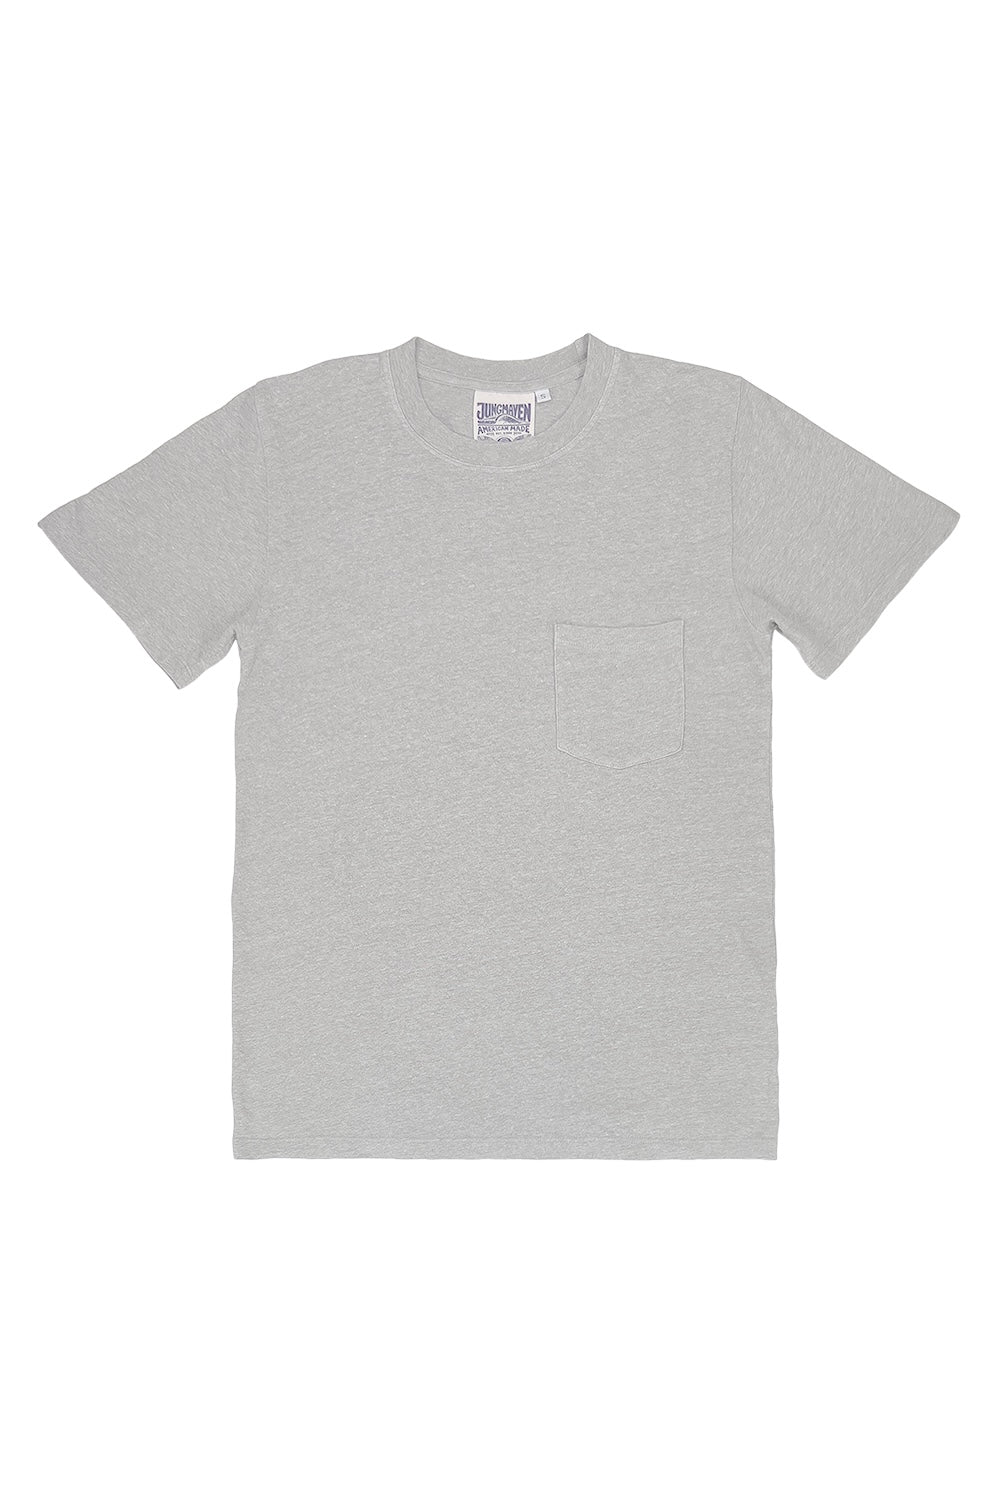 Heathered Jung Pocket Tee | Jungmaven Hemp Clothing & Accessories / Color: Athletic Gray